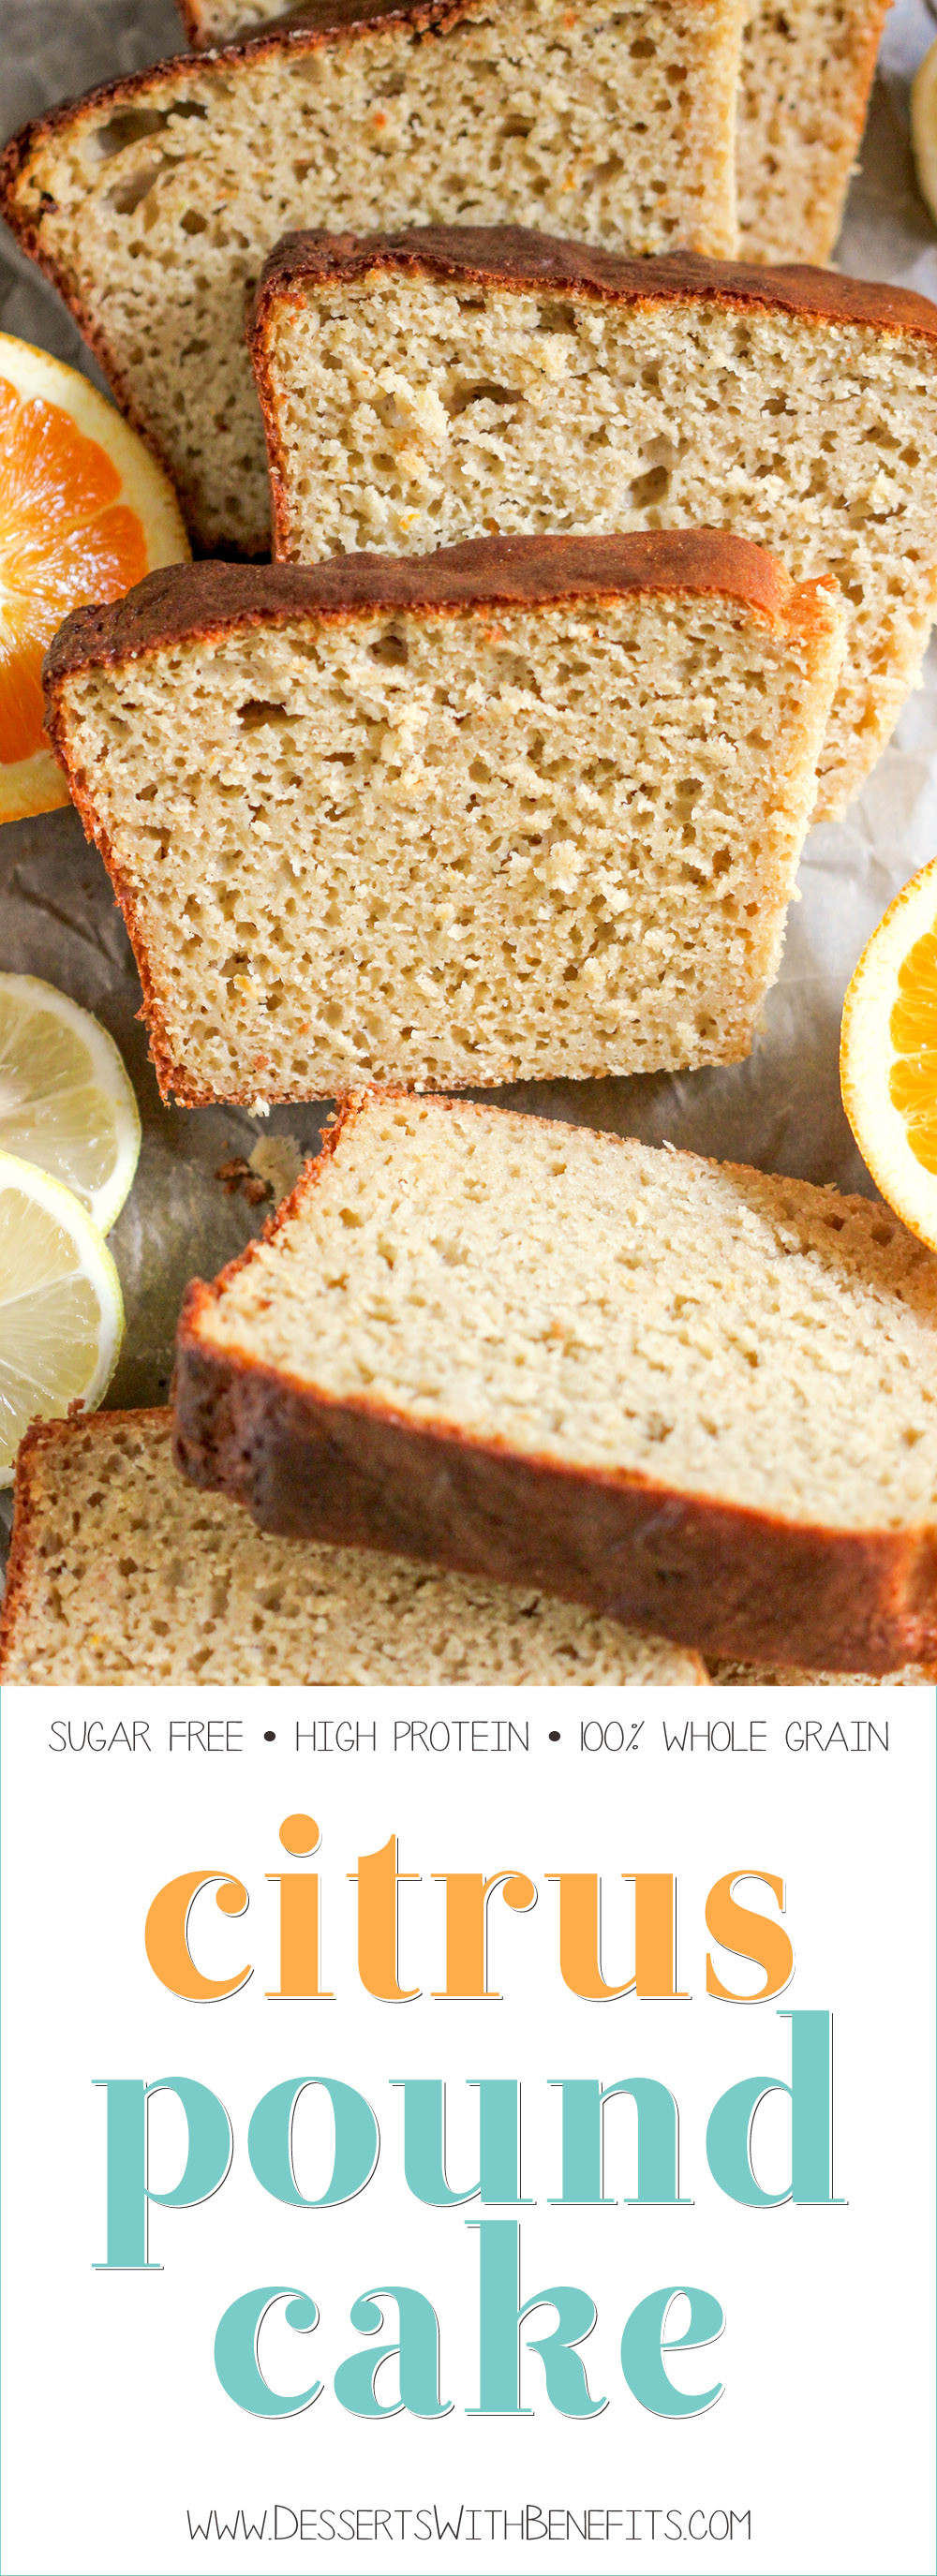 Healthy Pound Cake Recipe
 Healthy Citrus Pound Cake Recipe Made Without Butter and